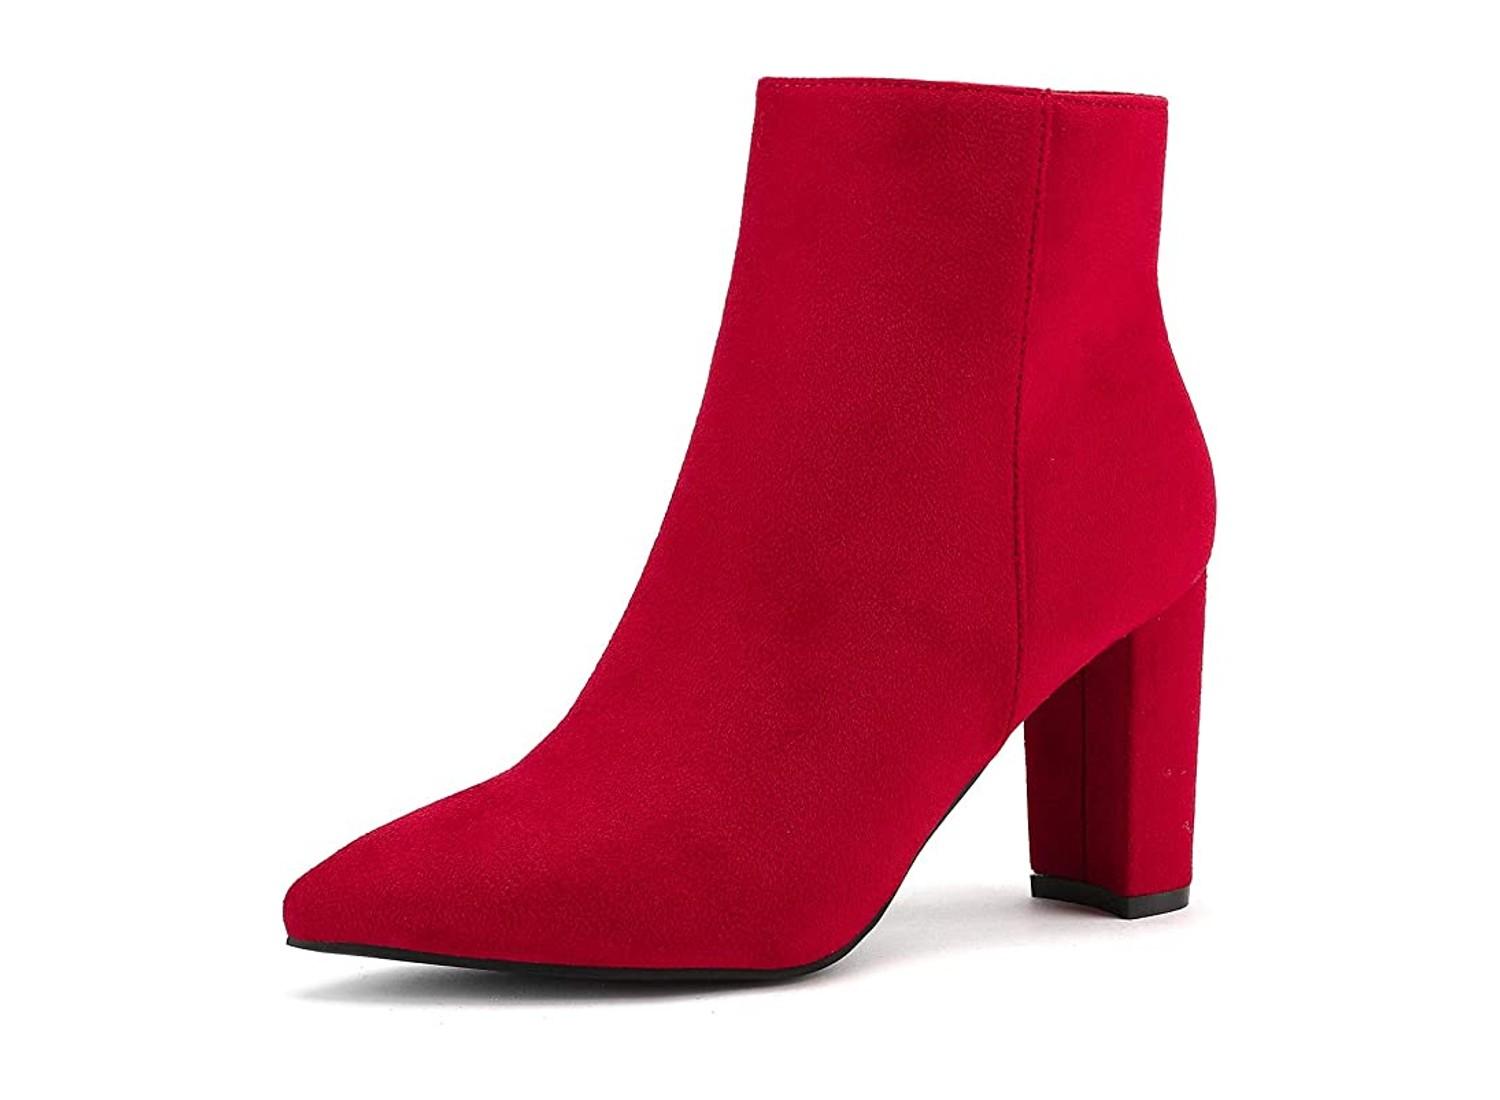 A red Dream Pairs high heel boot.